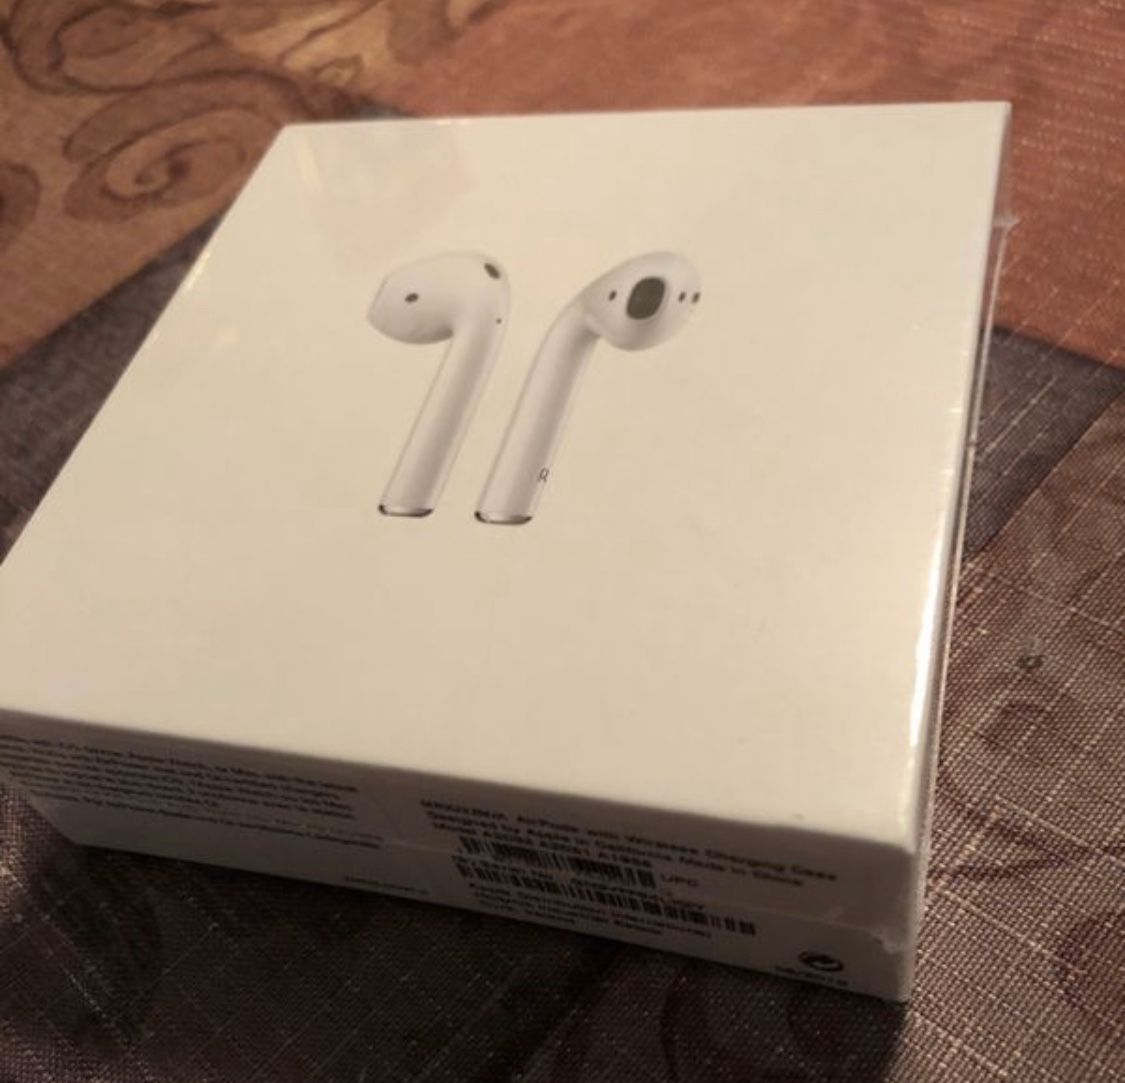 Apple AirPods 2nd Generation with Wireless Compatible Charging Case